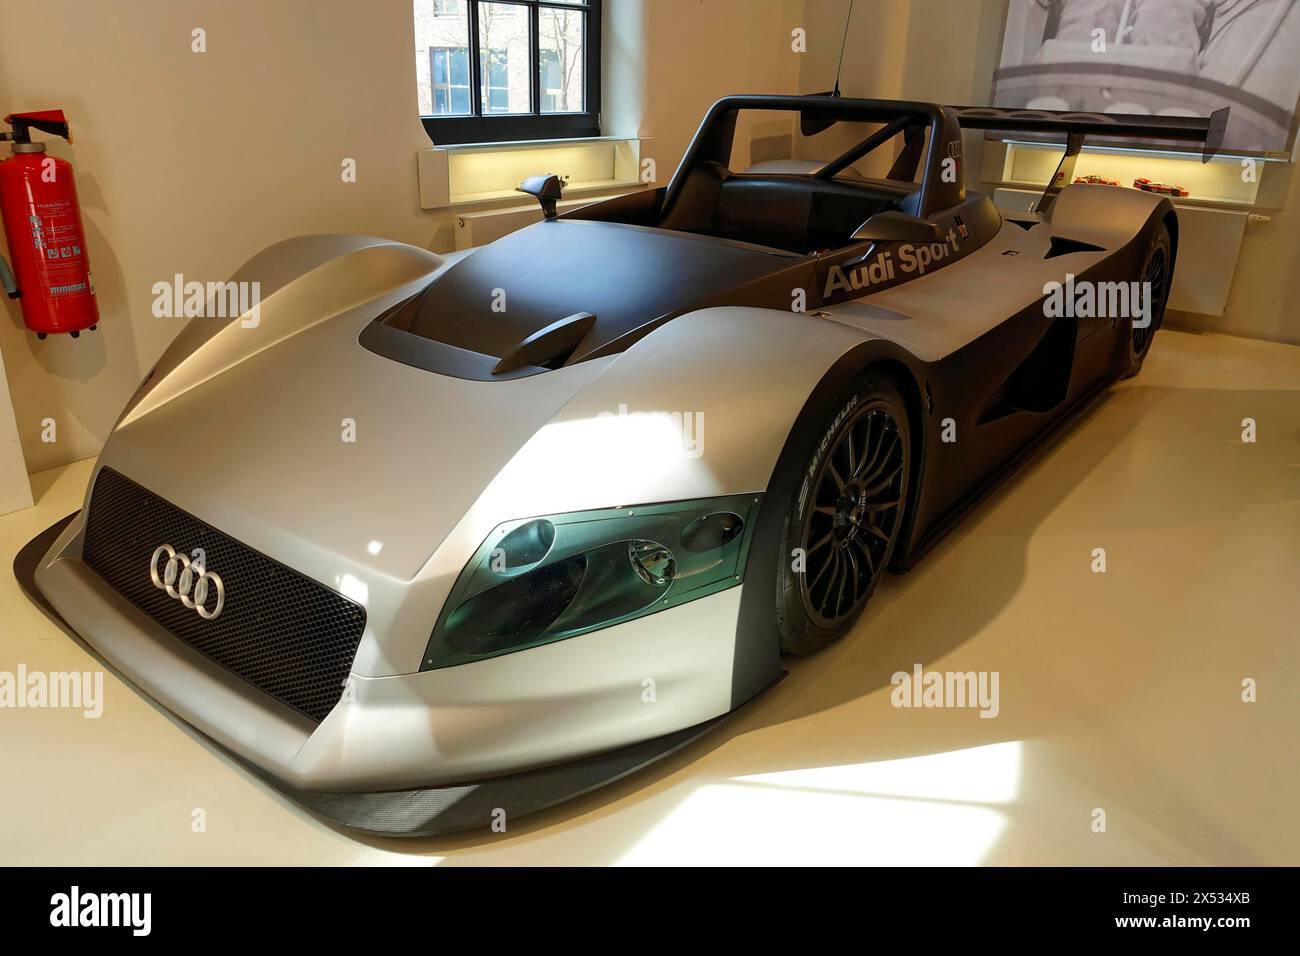 AUDI R8R LMP Prototype, A silver Audi sports car presented in a showroom, AUTOMUSEUM PROTOTYP, Hamburg, Hanseatic City of Hamburg, Germany Europe Stock Photo